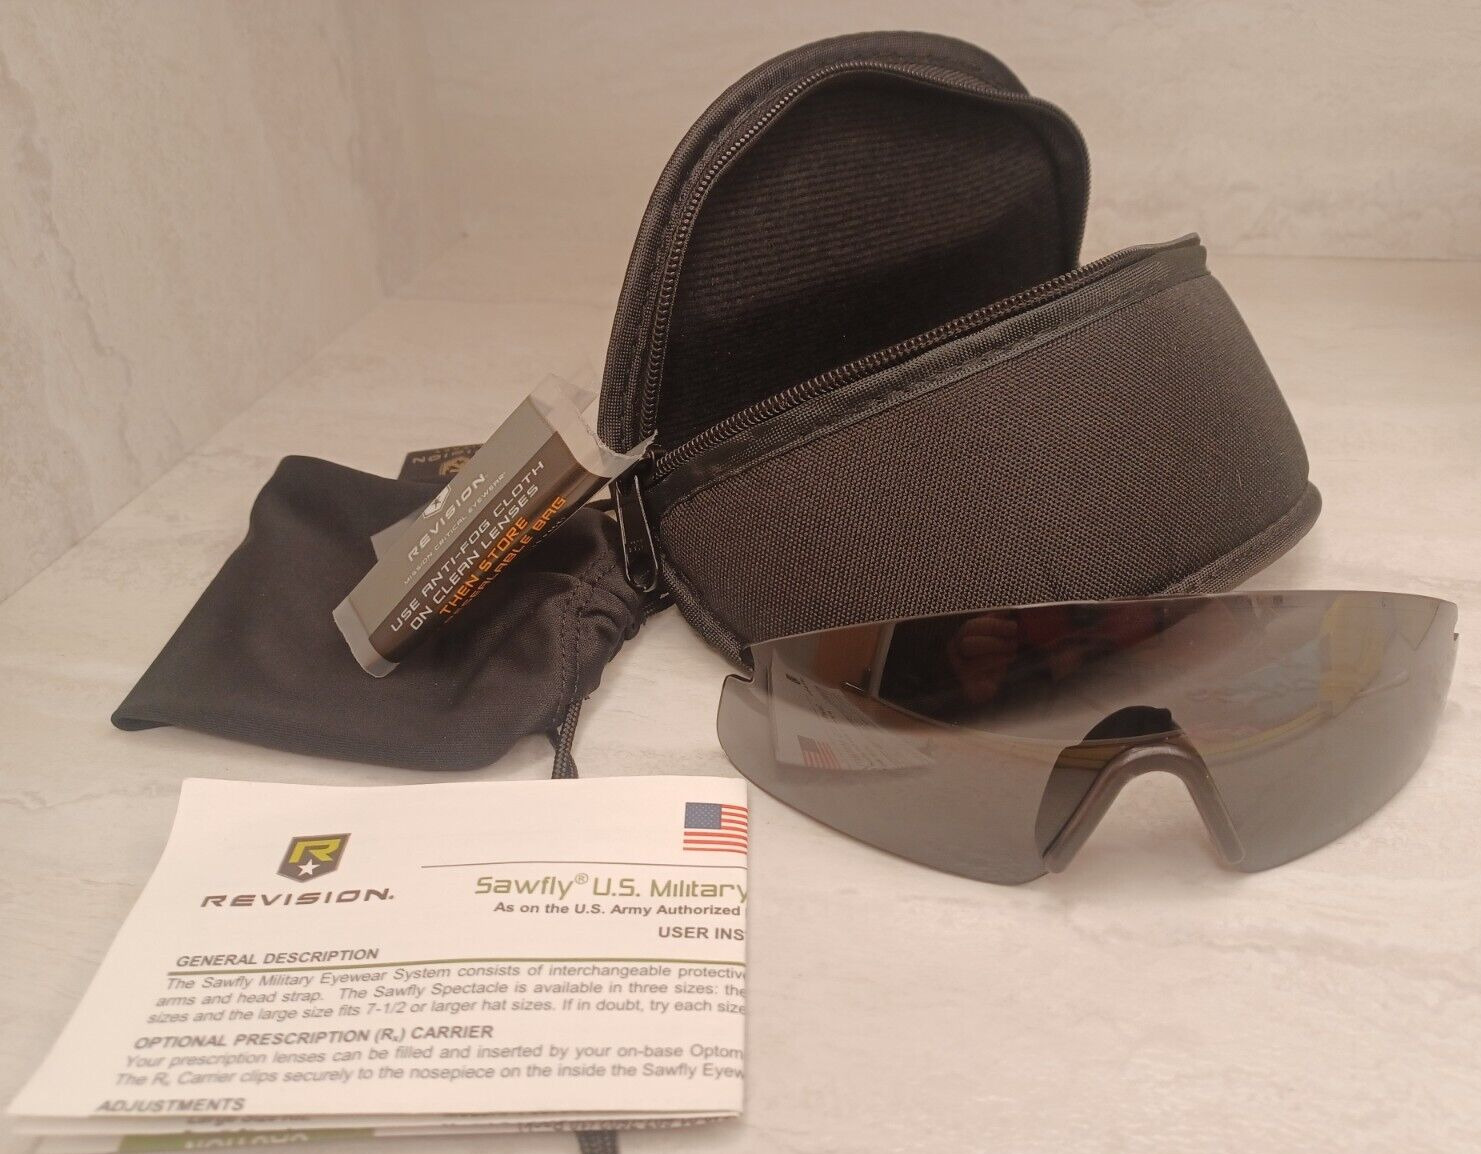 Military Revision Eye Pro Sawfly Saw Fly Sunglass lens case accessories No Frame